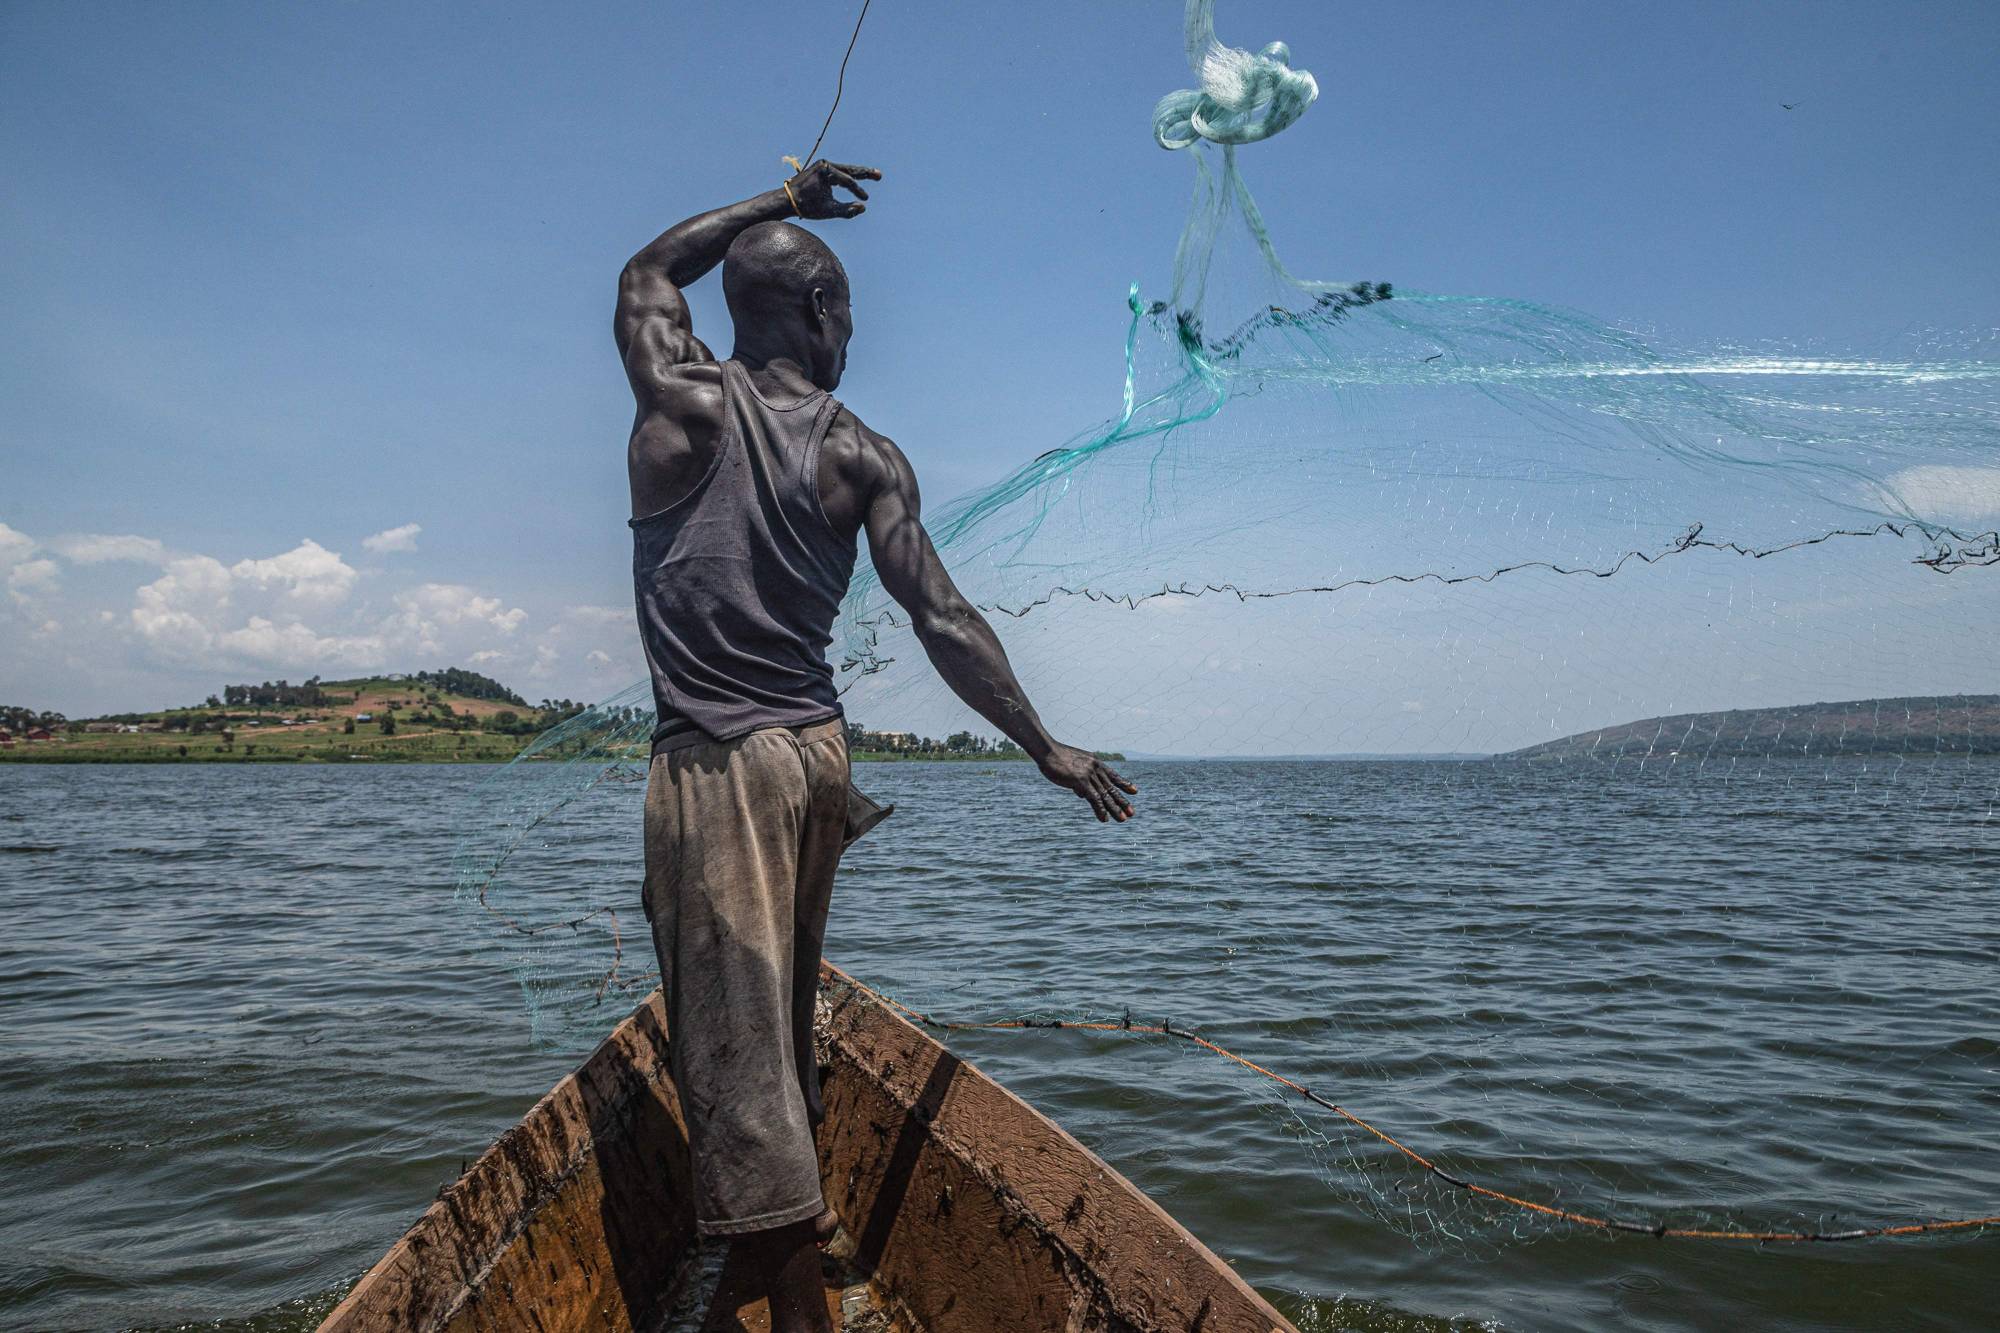 Jowali Kitagenda, 40, casting his net to catch fish on the Nile River in Jinja, Uganda, on Oct. 7. A report published by the Nile Basin Initiative last year raised alarm bells over rising industrial pollution, with government regulations allowing factory owners to set up shop within 100 meters of the river bank. | AFP-JIJI